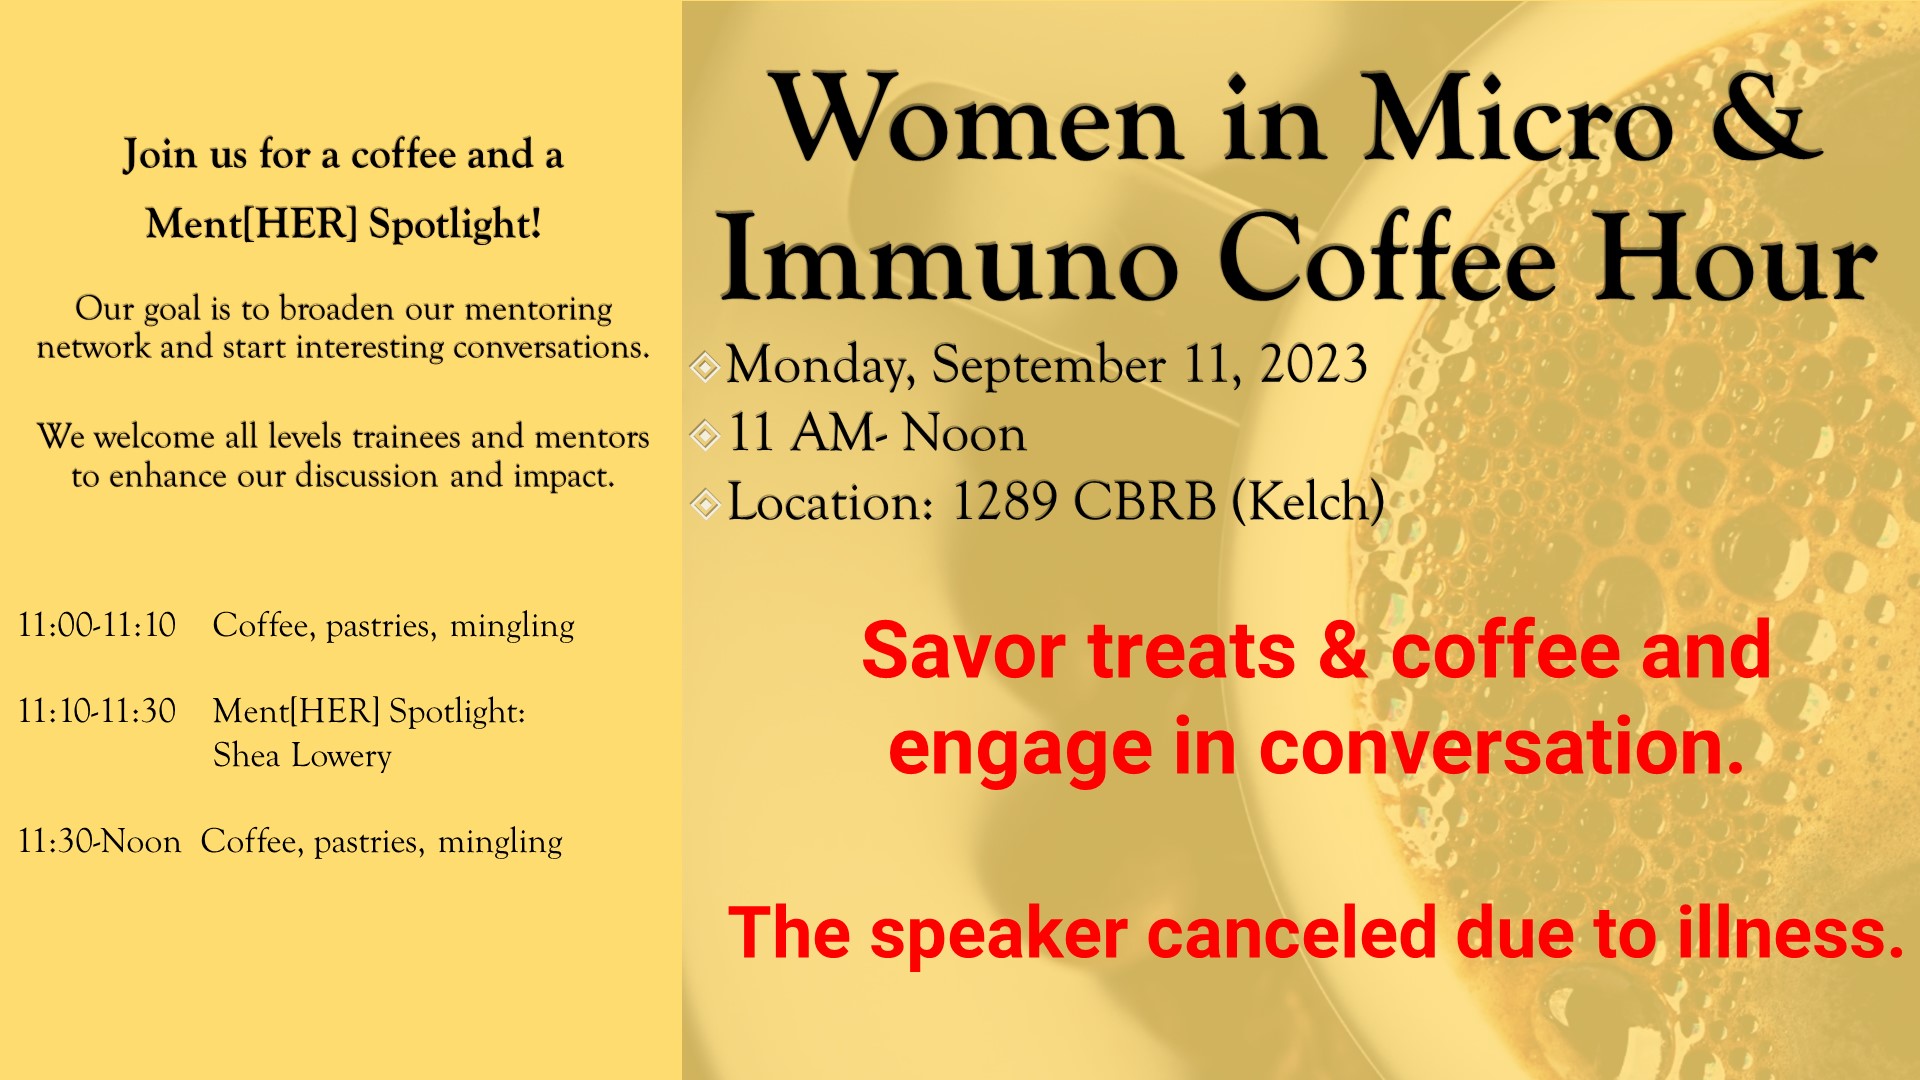 WMIC Update September 11th - Speaker Canceled, but come to enjoy treats and engage in conversation